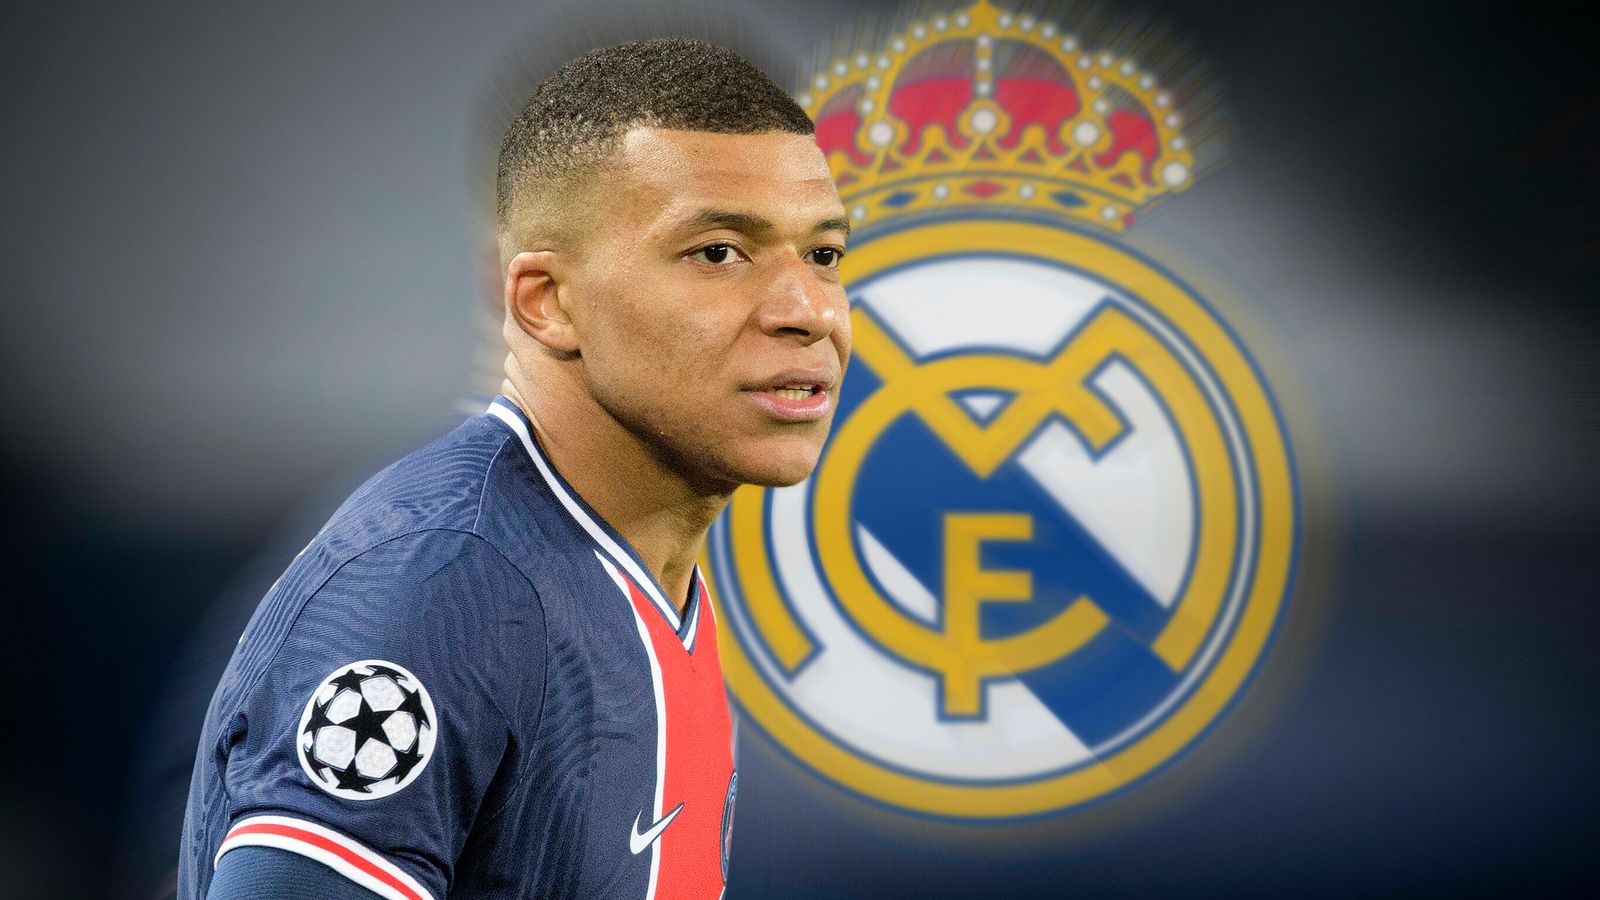 Mbappe stays at PSG despite Real being ready to pay £197m Real Madrid